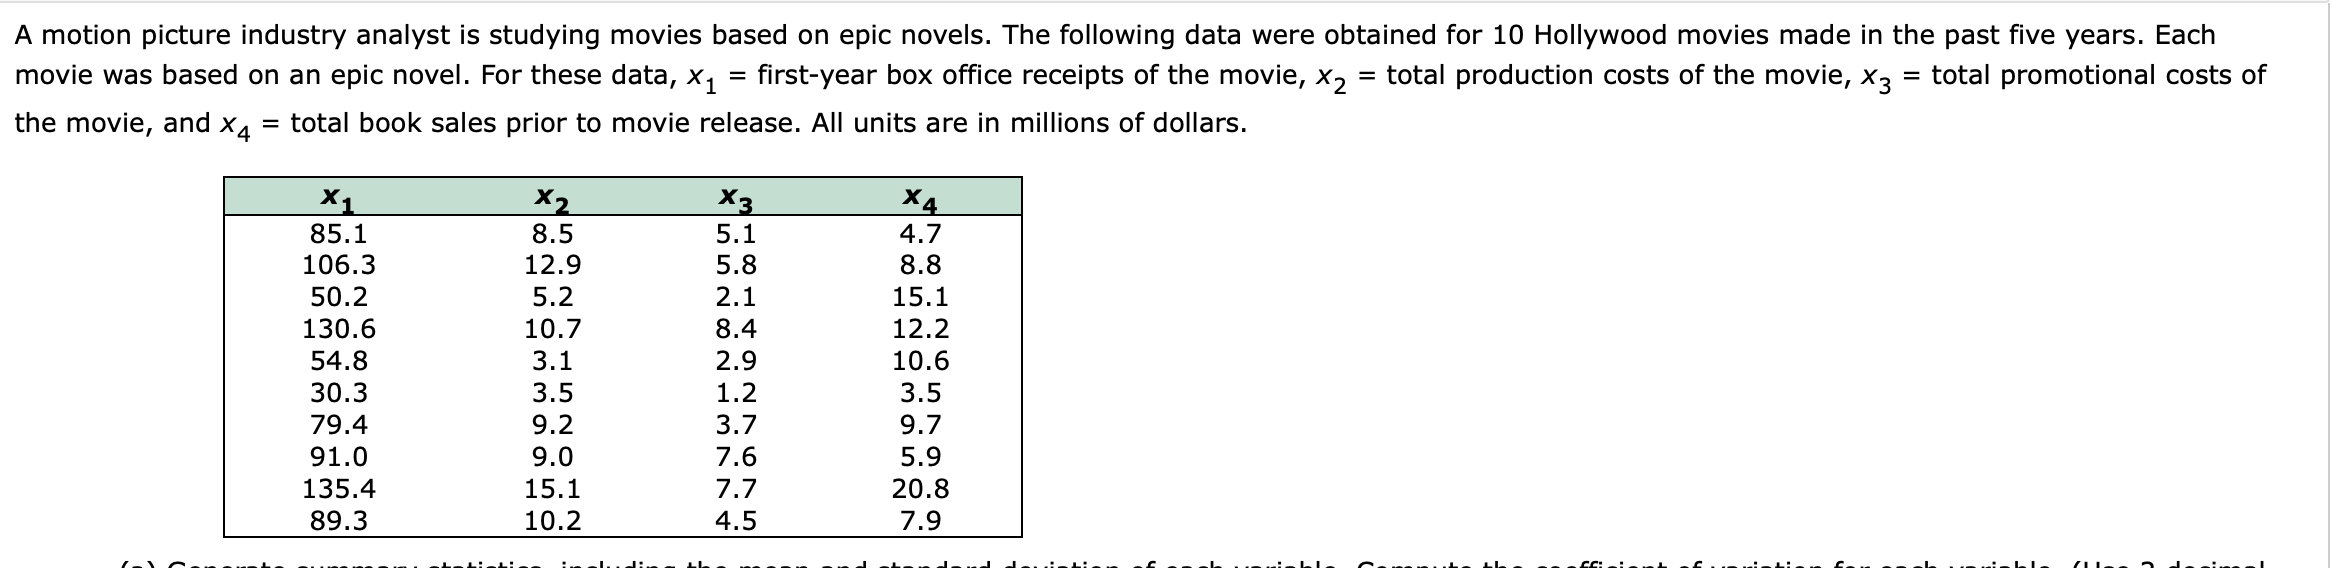 A motion picture industry analyst is studying movies based on epic novels. The following data were obtained for 10 Hollywood movies made in the past five years. Each
movie was based on an epic novel. For these data, x, = first-ycar box office receipts of the movie, x, = total production costs of the movie, x3 = total promotional costs of
the movie, and x4 - total book sales prior to movie release. All units are in millions of dollars.
85.1
х
X2
8.5
12.9
5.2
10.7
3.1
3.5
9.2
9.0
5.1
5.8
2.1
8.4
2.9
1.2
3.7
7.6
7.7
4.7
8.8
106.3
15.1
130.6
54.8
30.3
79.4
12.2
10.6
3.5
9.7
5.9
91.0
135.4
15.1
20.8
89.3
10.2
4.5
7.9
